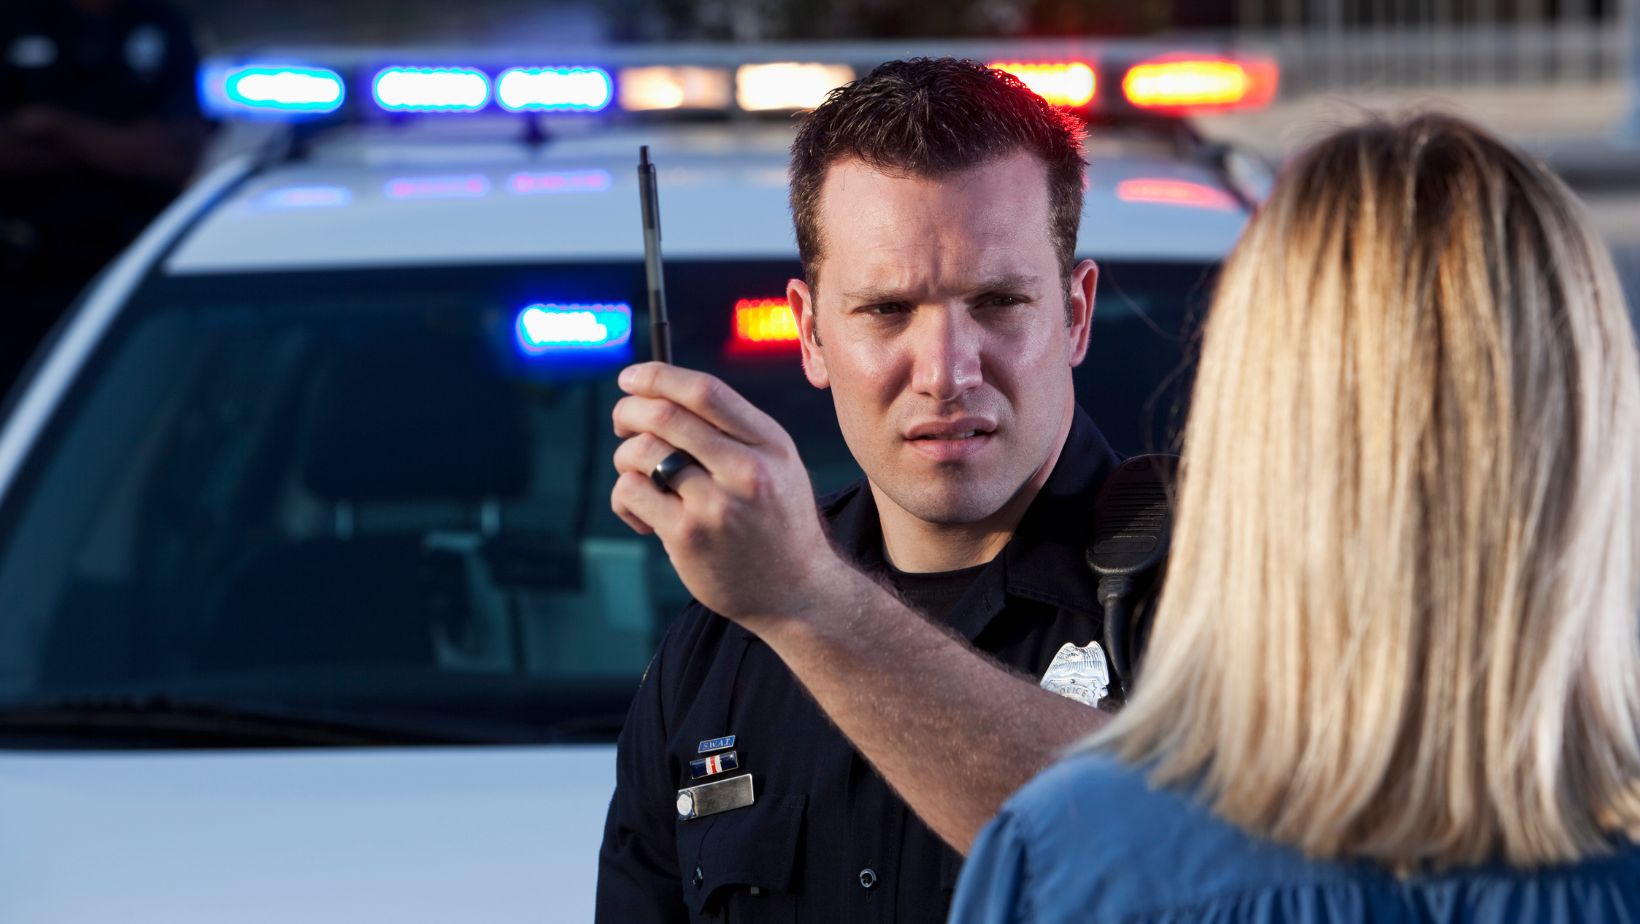 why do cops do field sobriety tests instead of breathalyzer